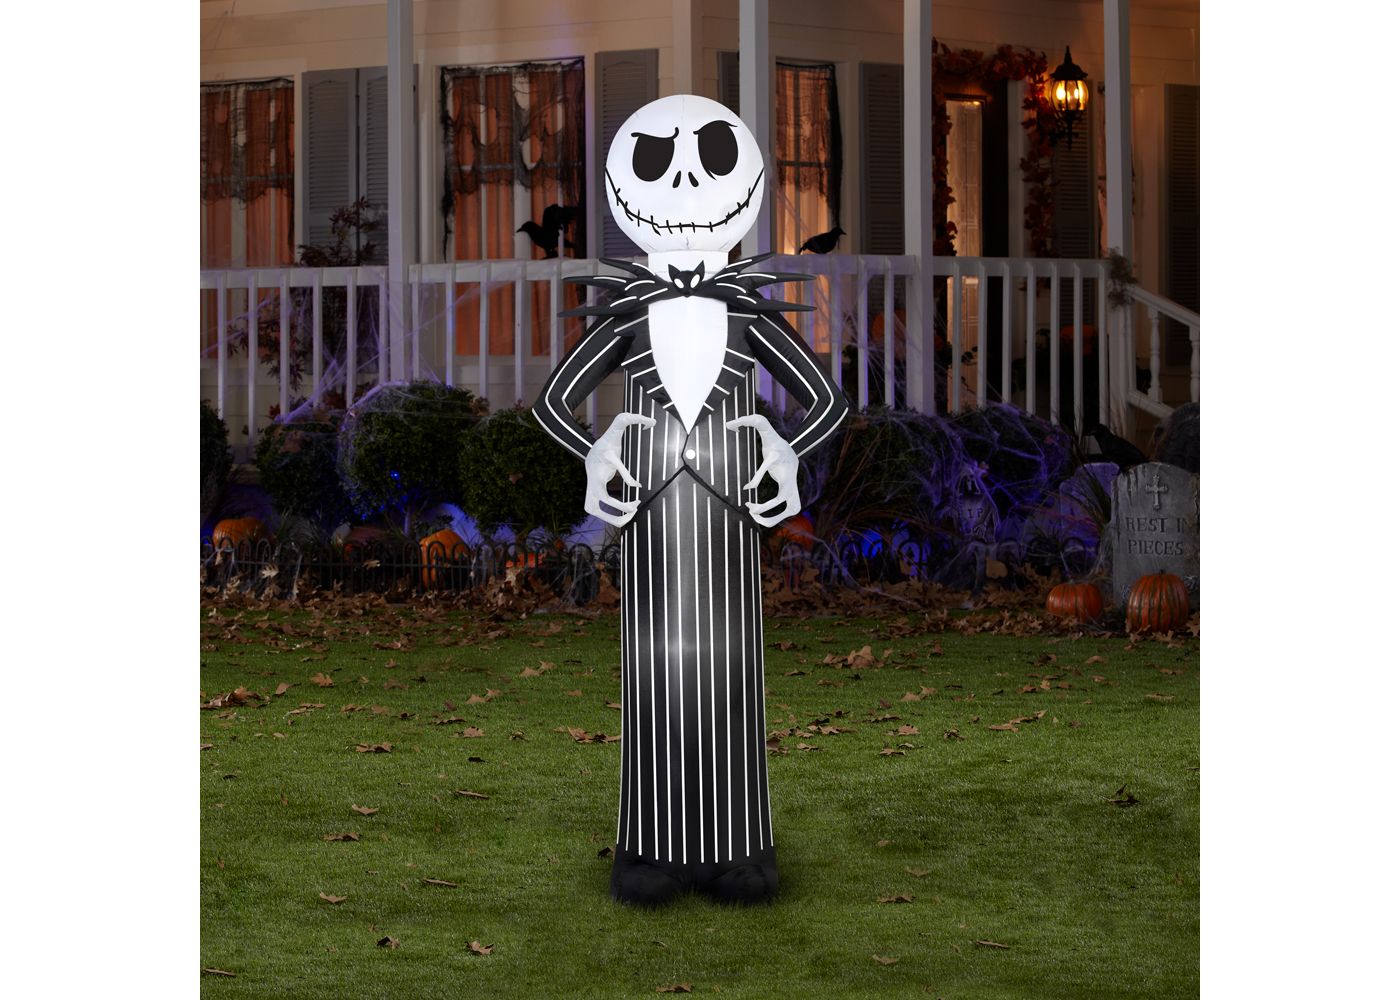 The Pumpkin King awaits his rightful place in your Halloween display! 